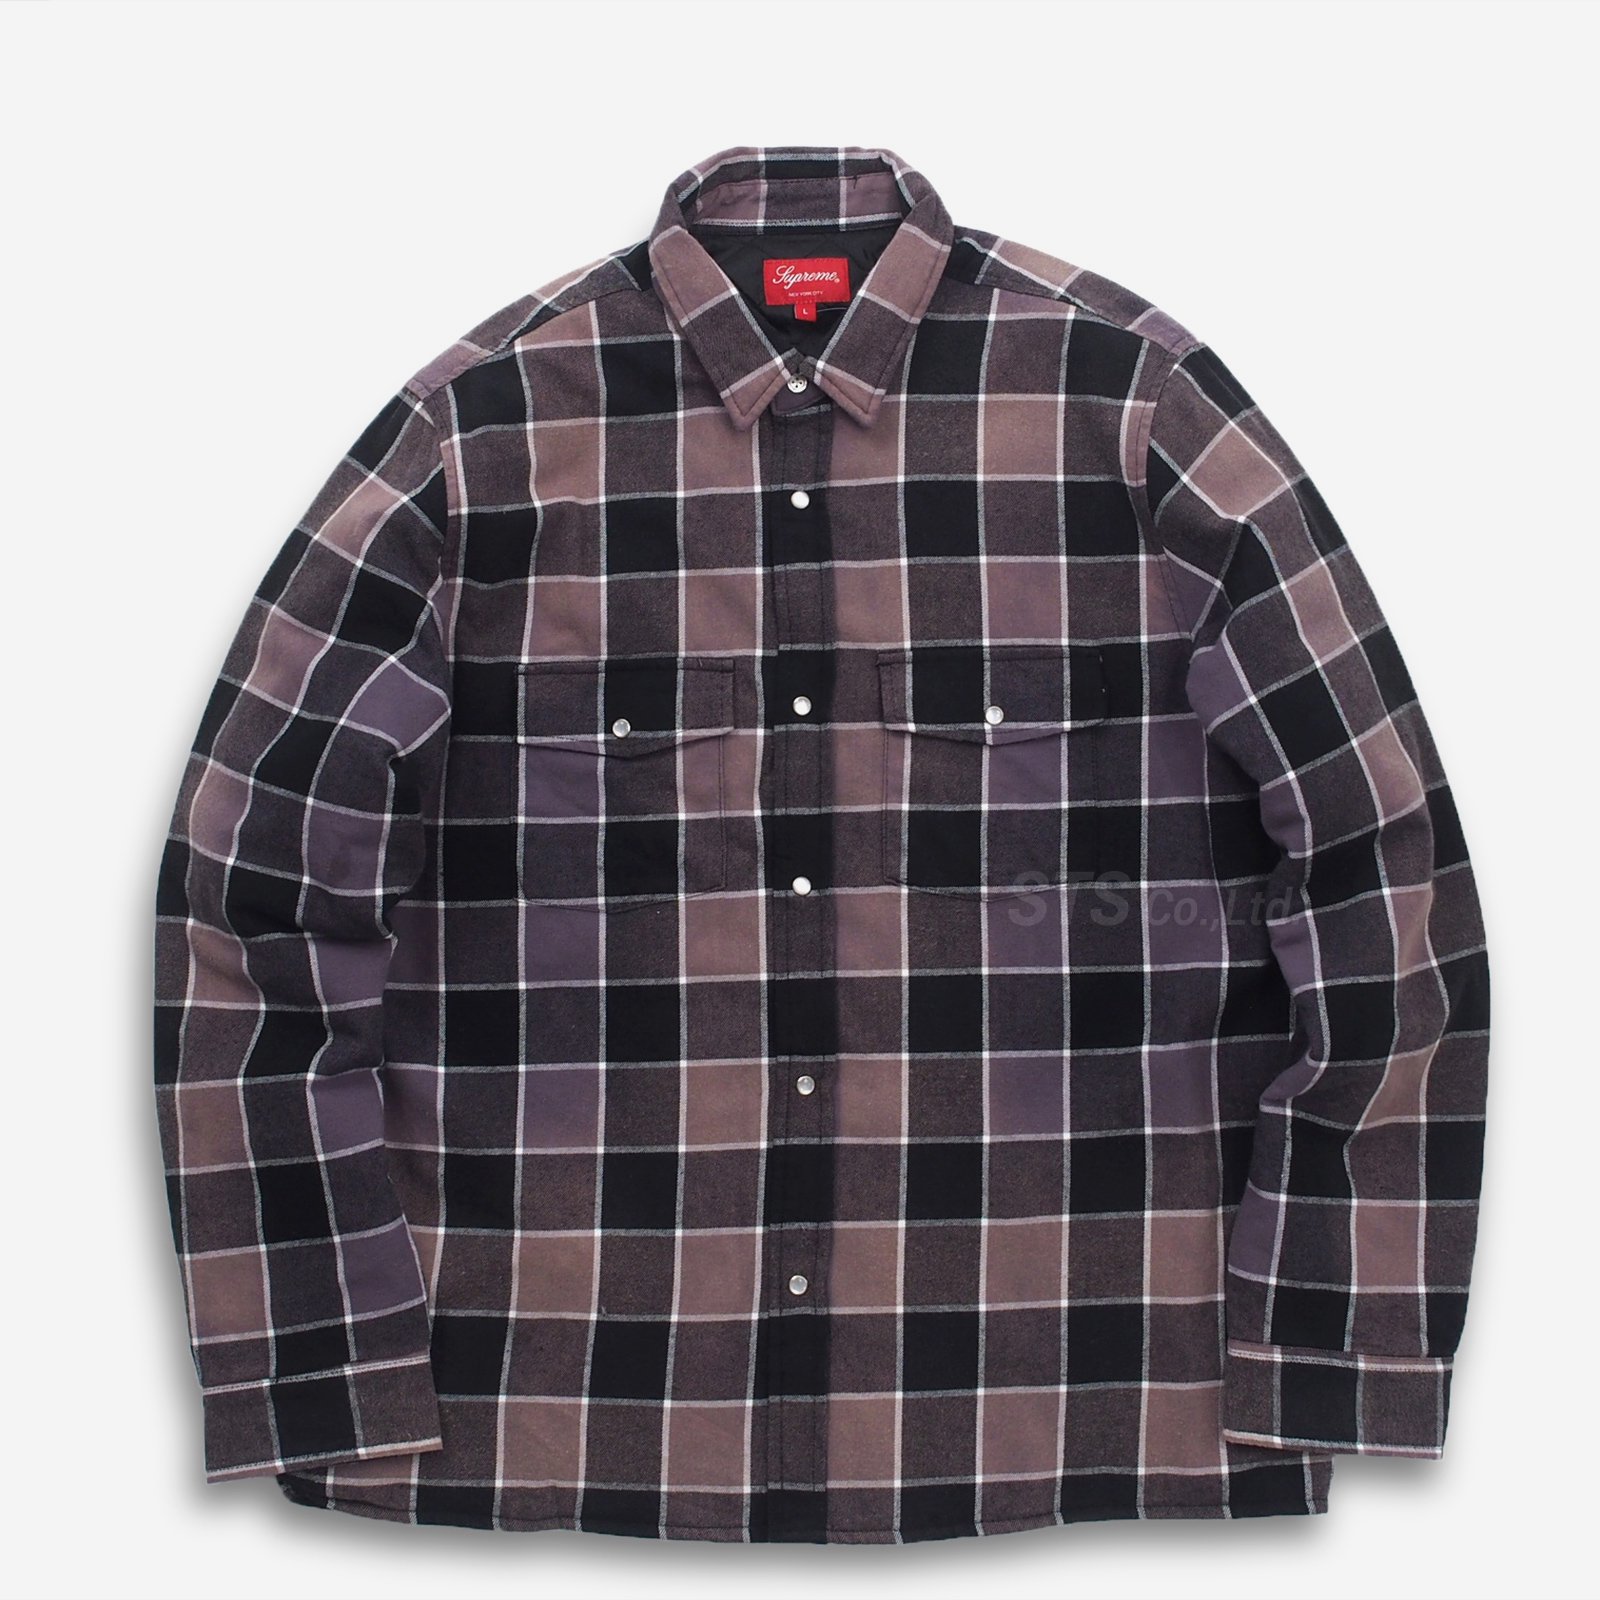 supreme Quilted Plaid Flannel olive